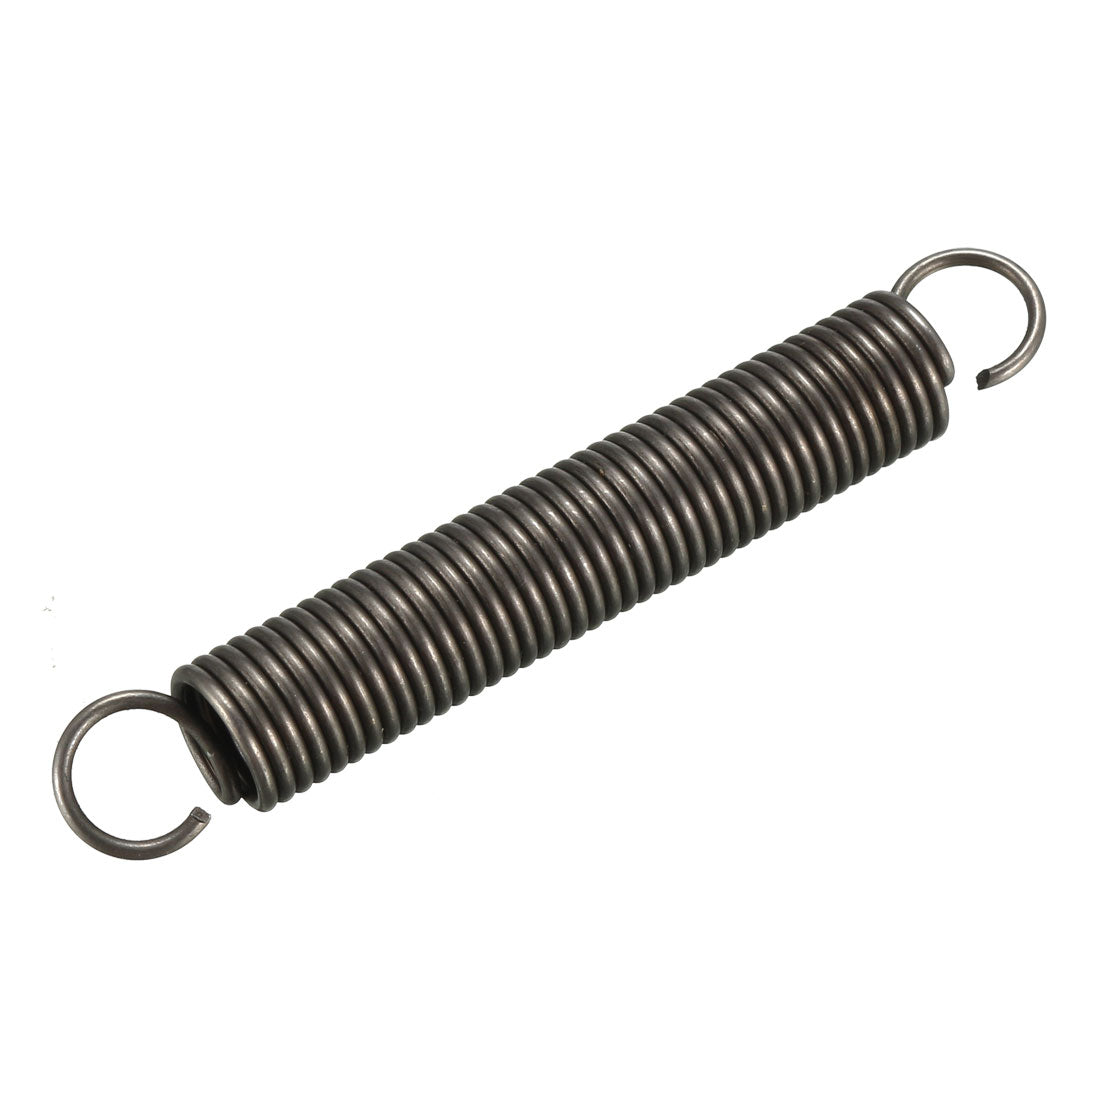 Uxcell Uxcell Extended Tension Spring Wire Diameter 0.098", OD 0.79", Free Length 2.36" 2pcs